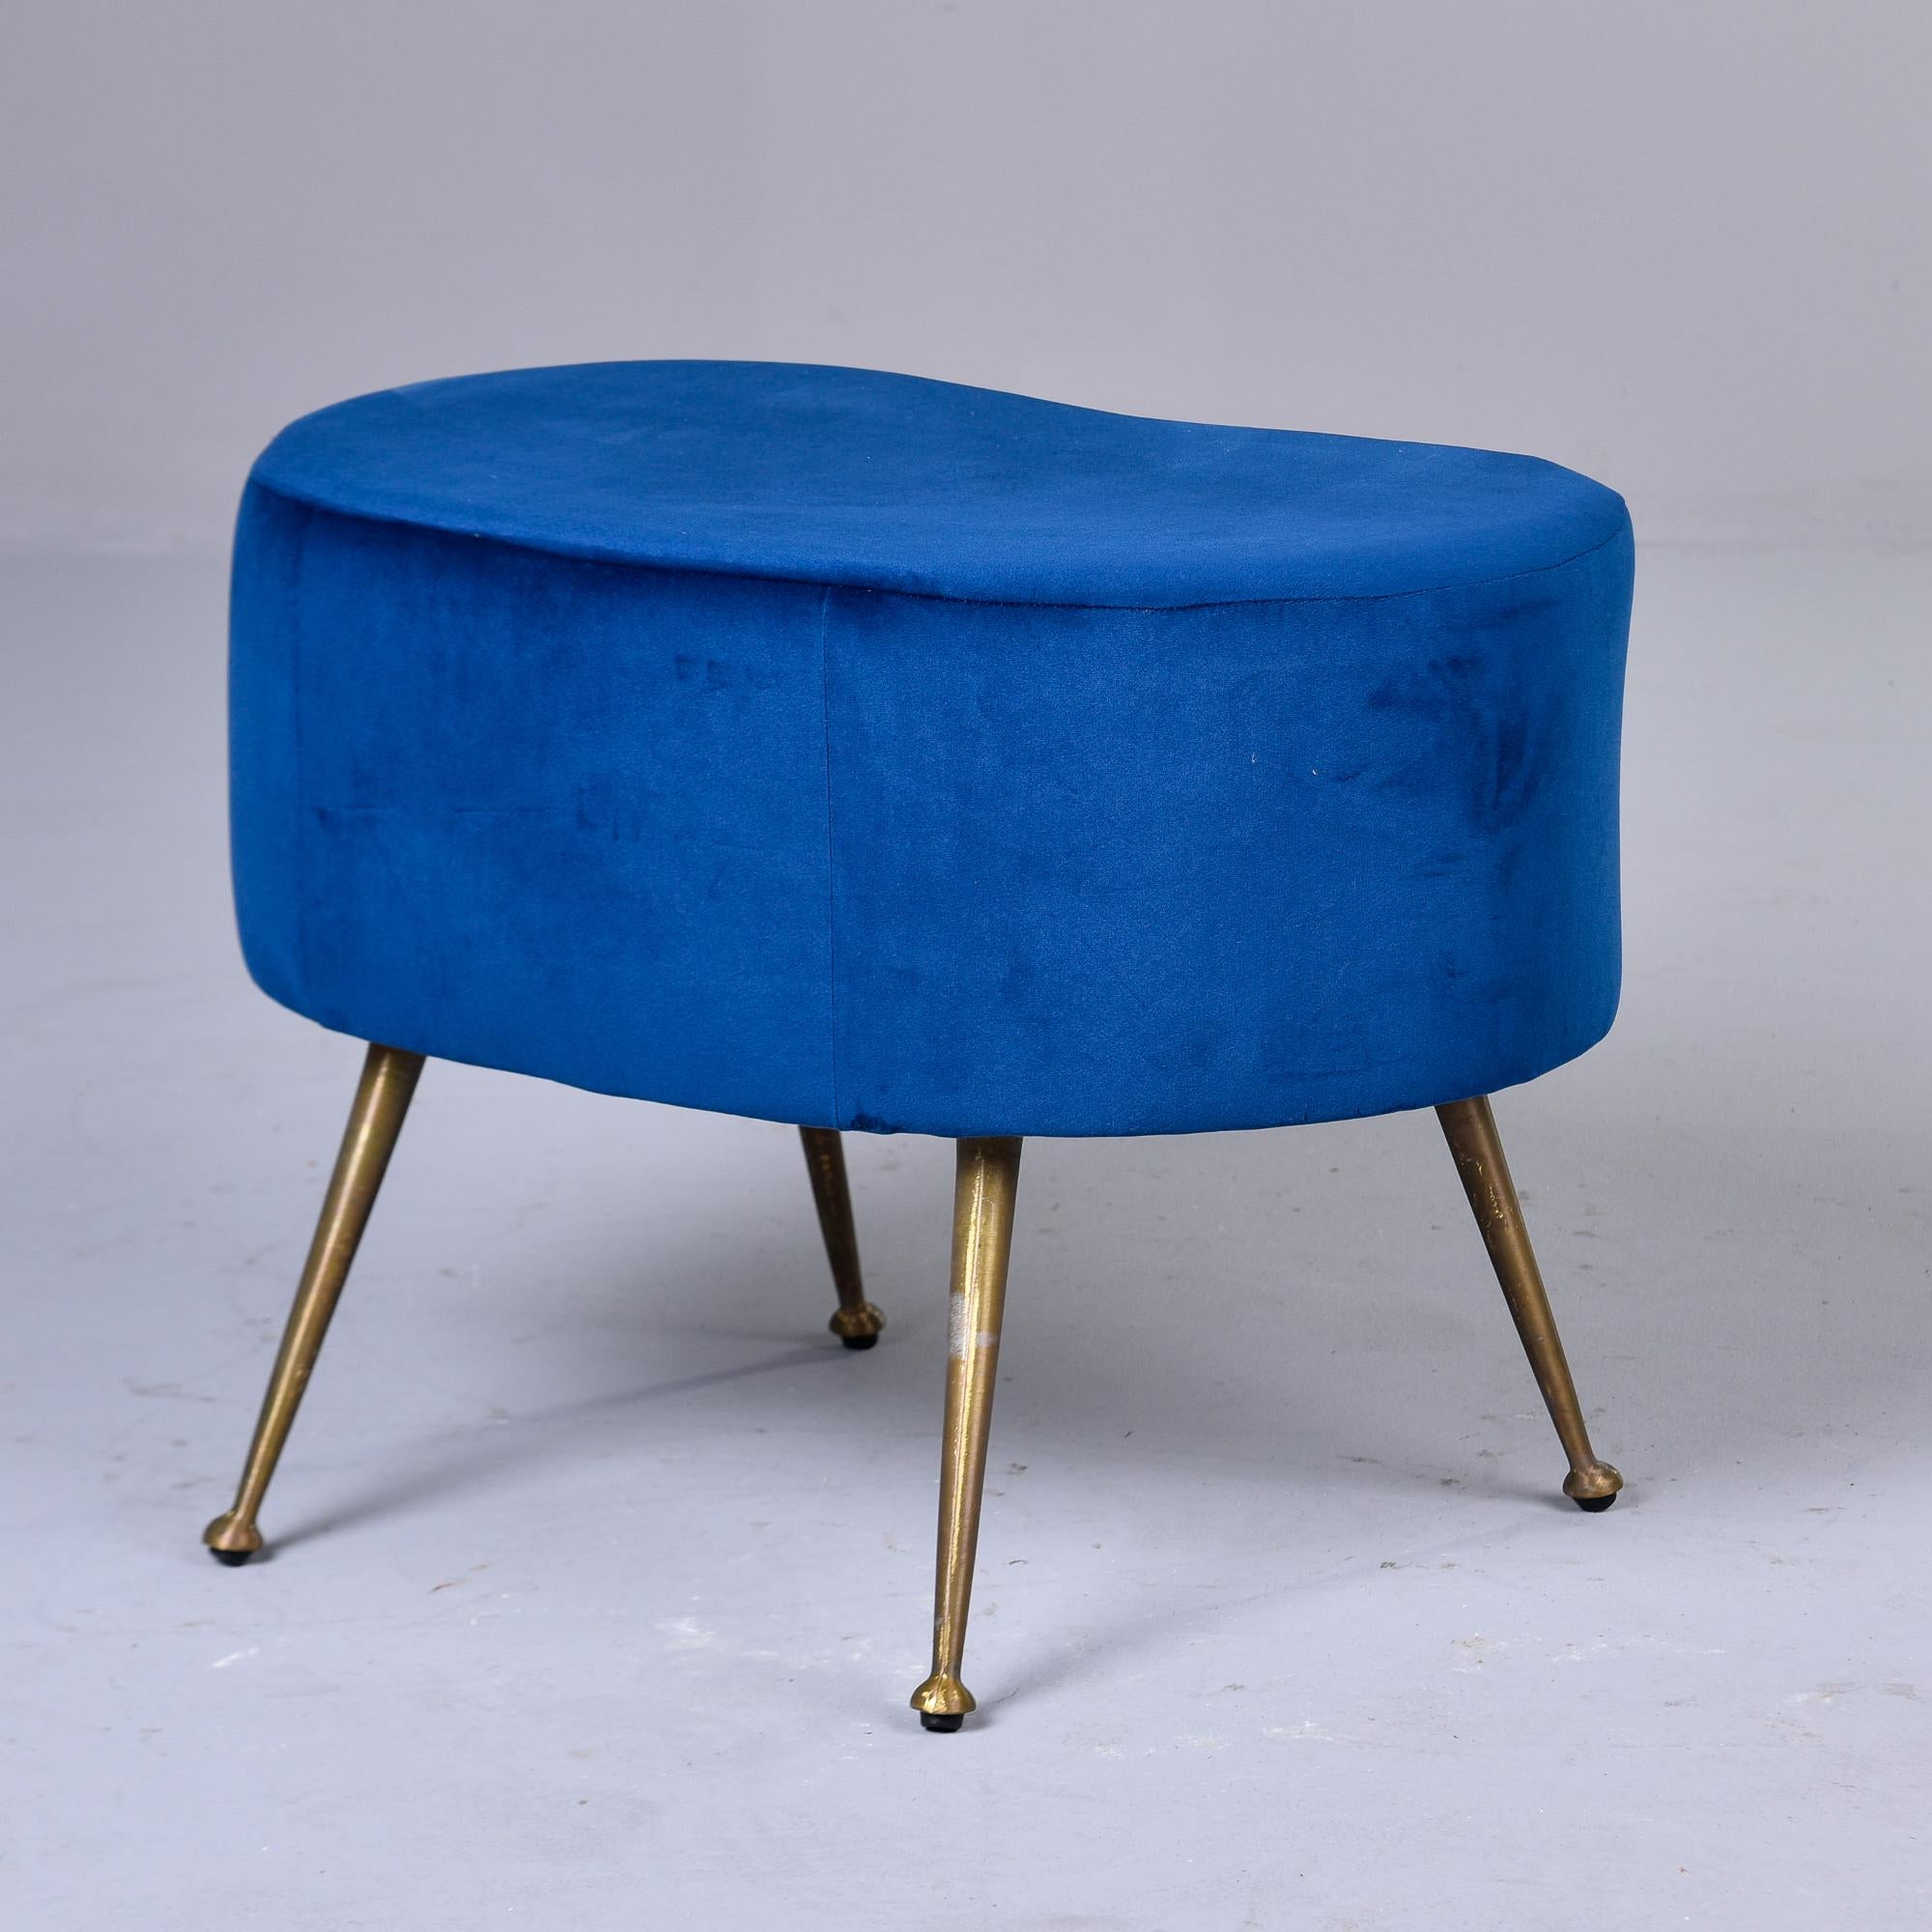 Italian Mid Century Blue Kidney Shaped Stool with Brass Legs For Sale 2